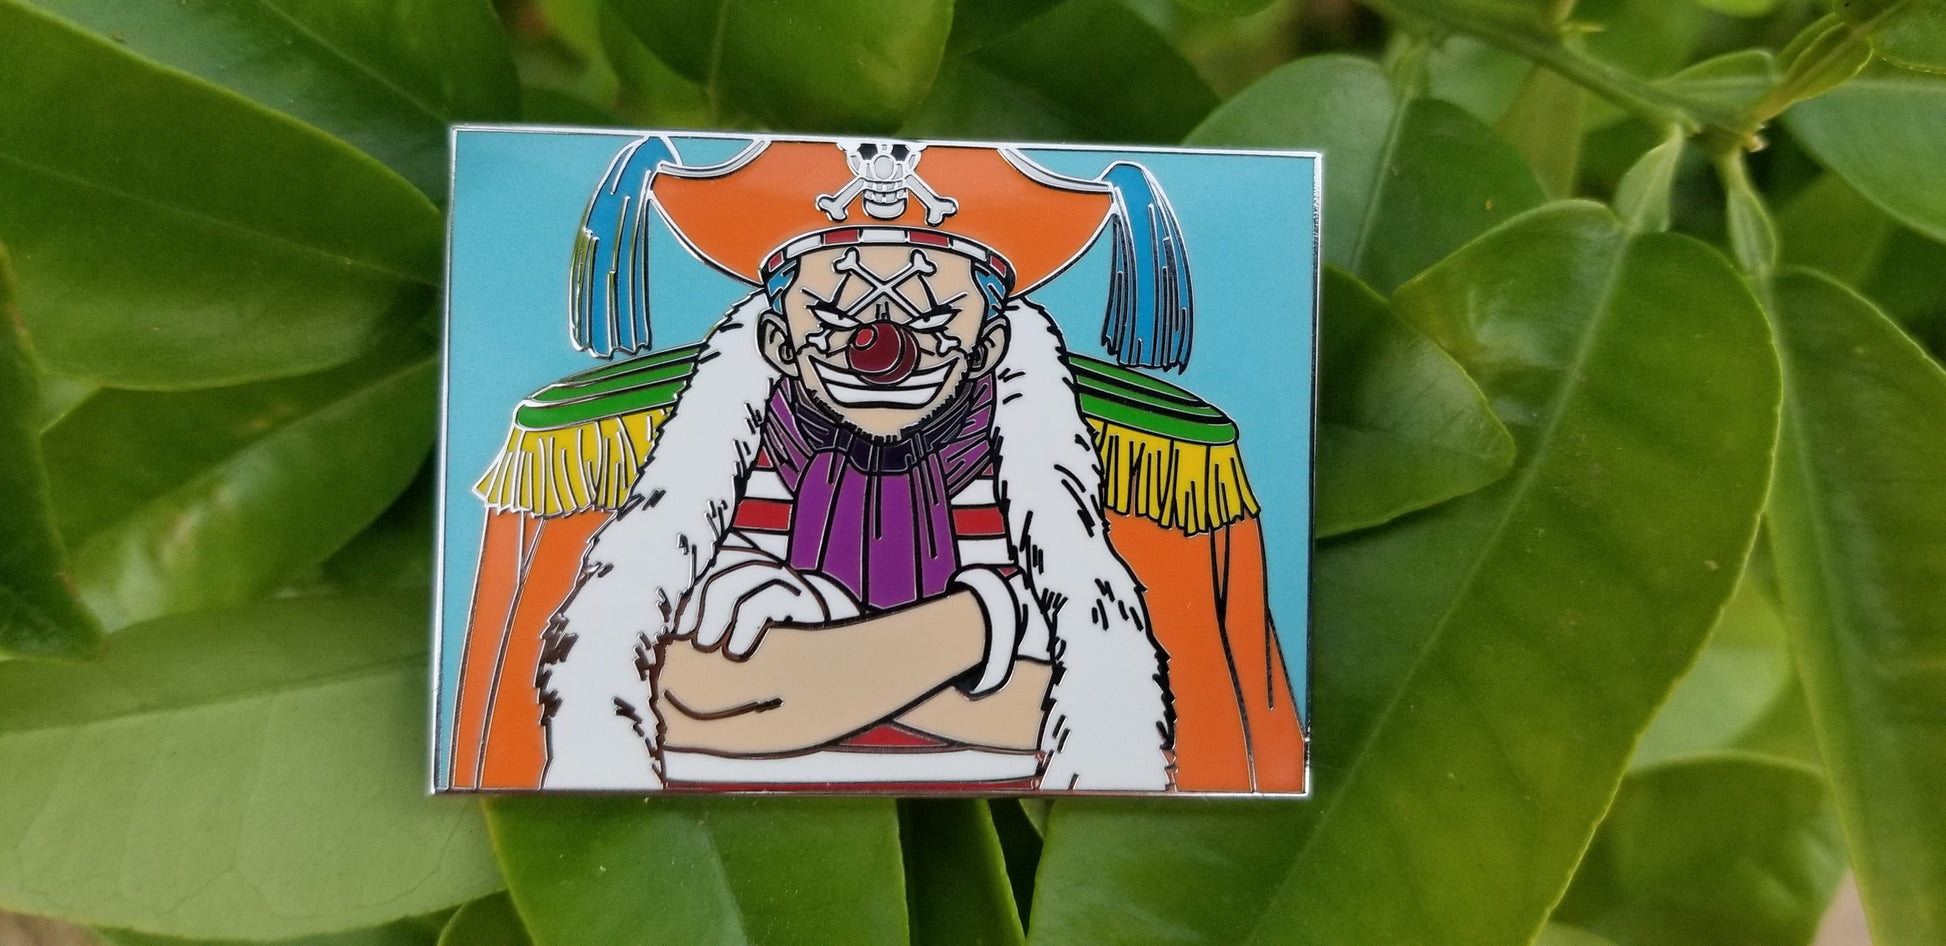 One Piece Inspired Buggy The Clown Pin – Purple Knight Pins